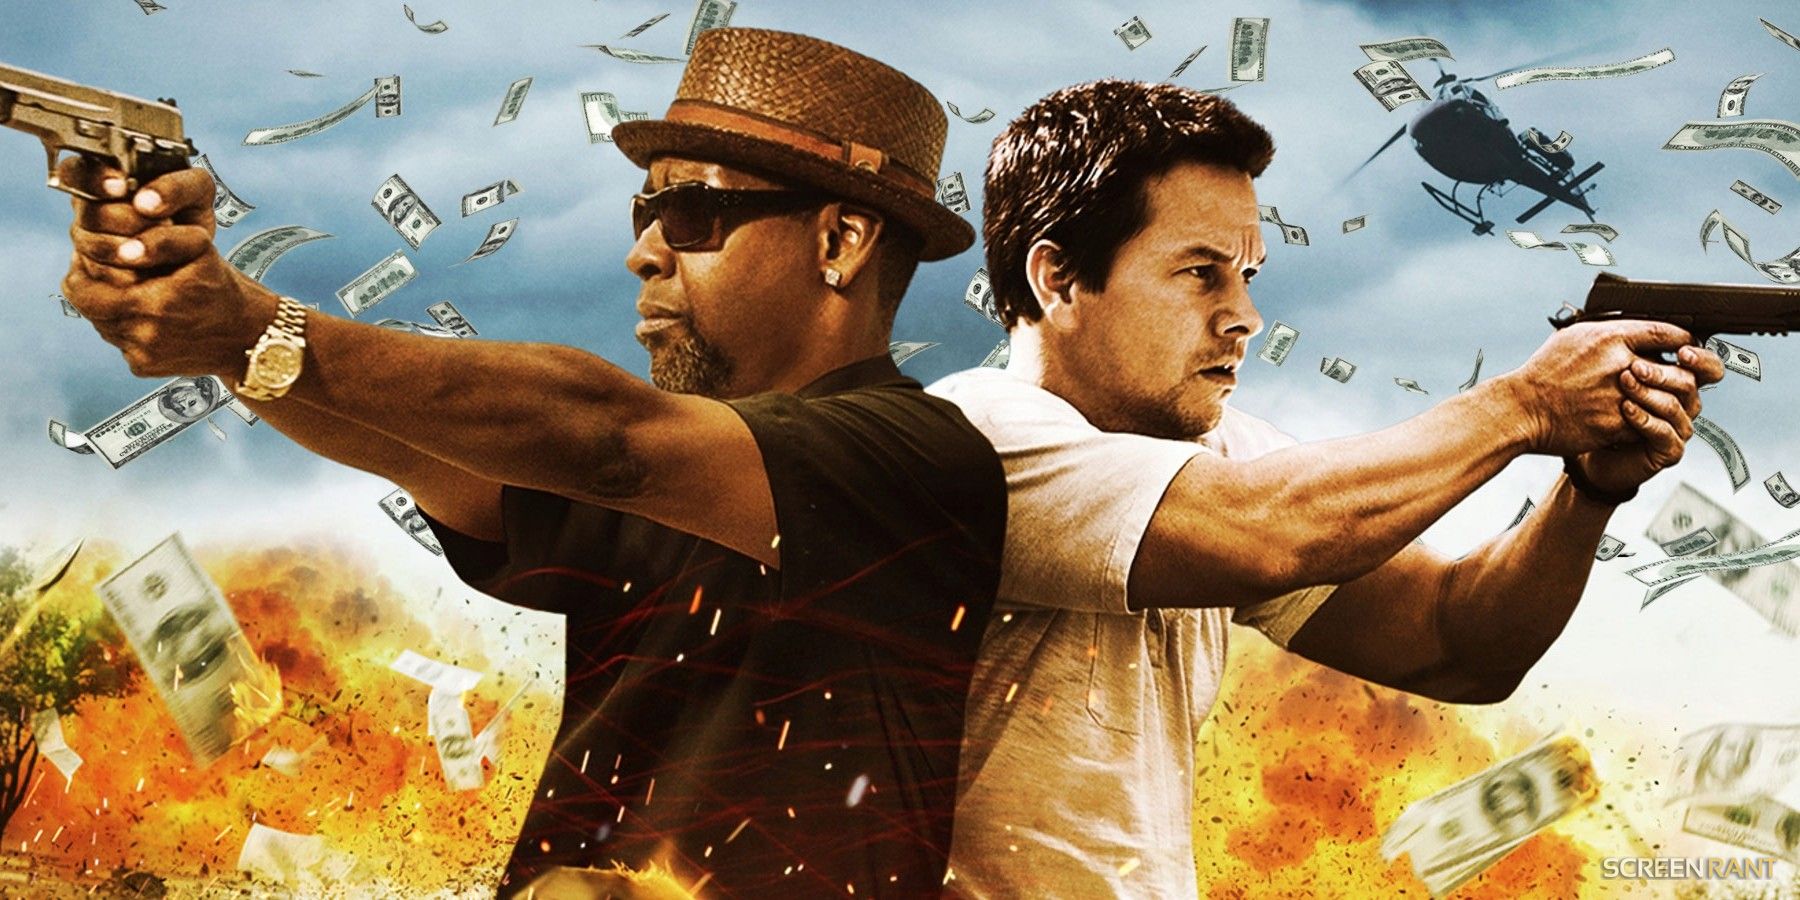 Denzel Washington's $131 Million Comic Book Movie With Mark Wahlberg Is Ripe For A Sequel 11 Years Later